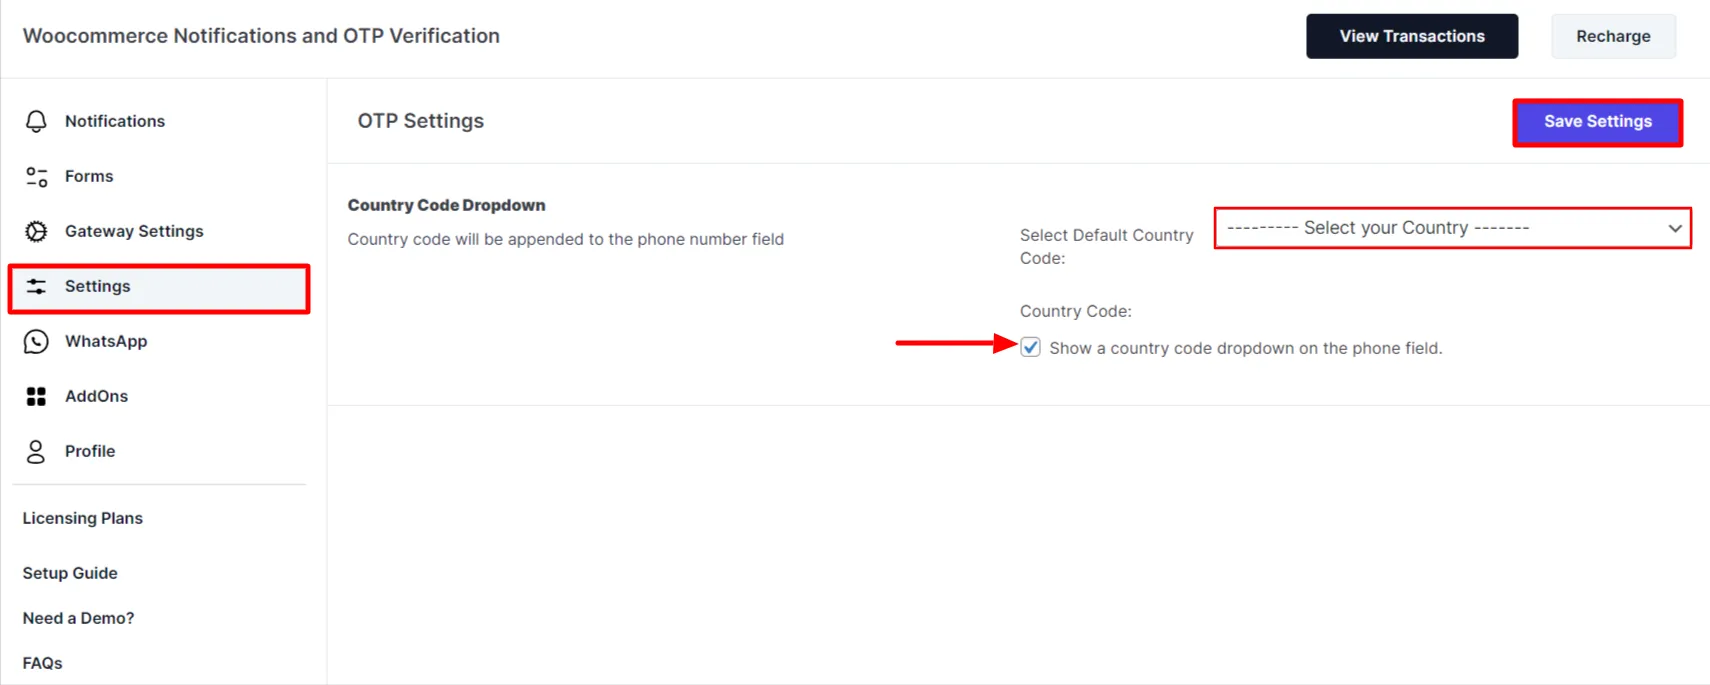 WooCommerce order notifications - enable country code dropdown